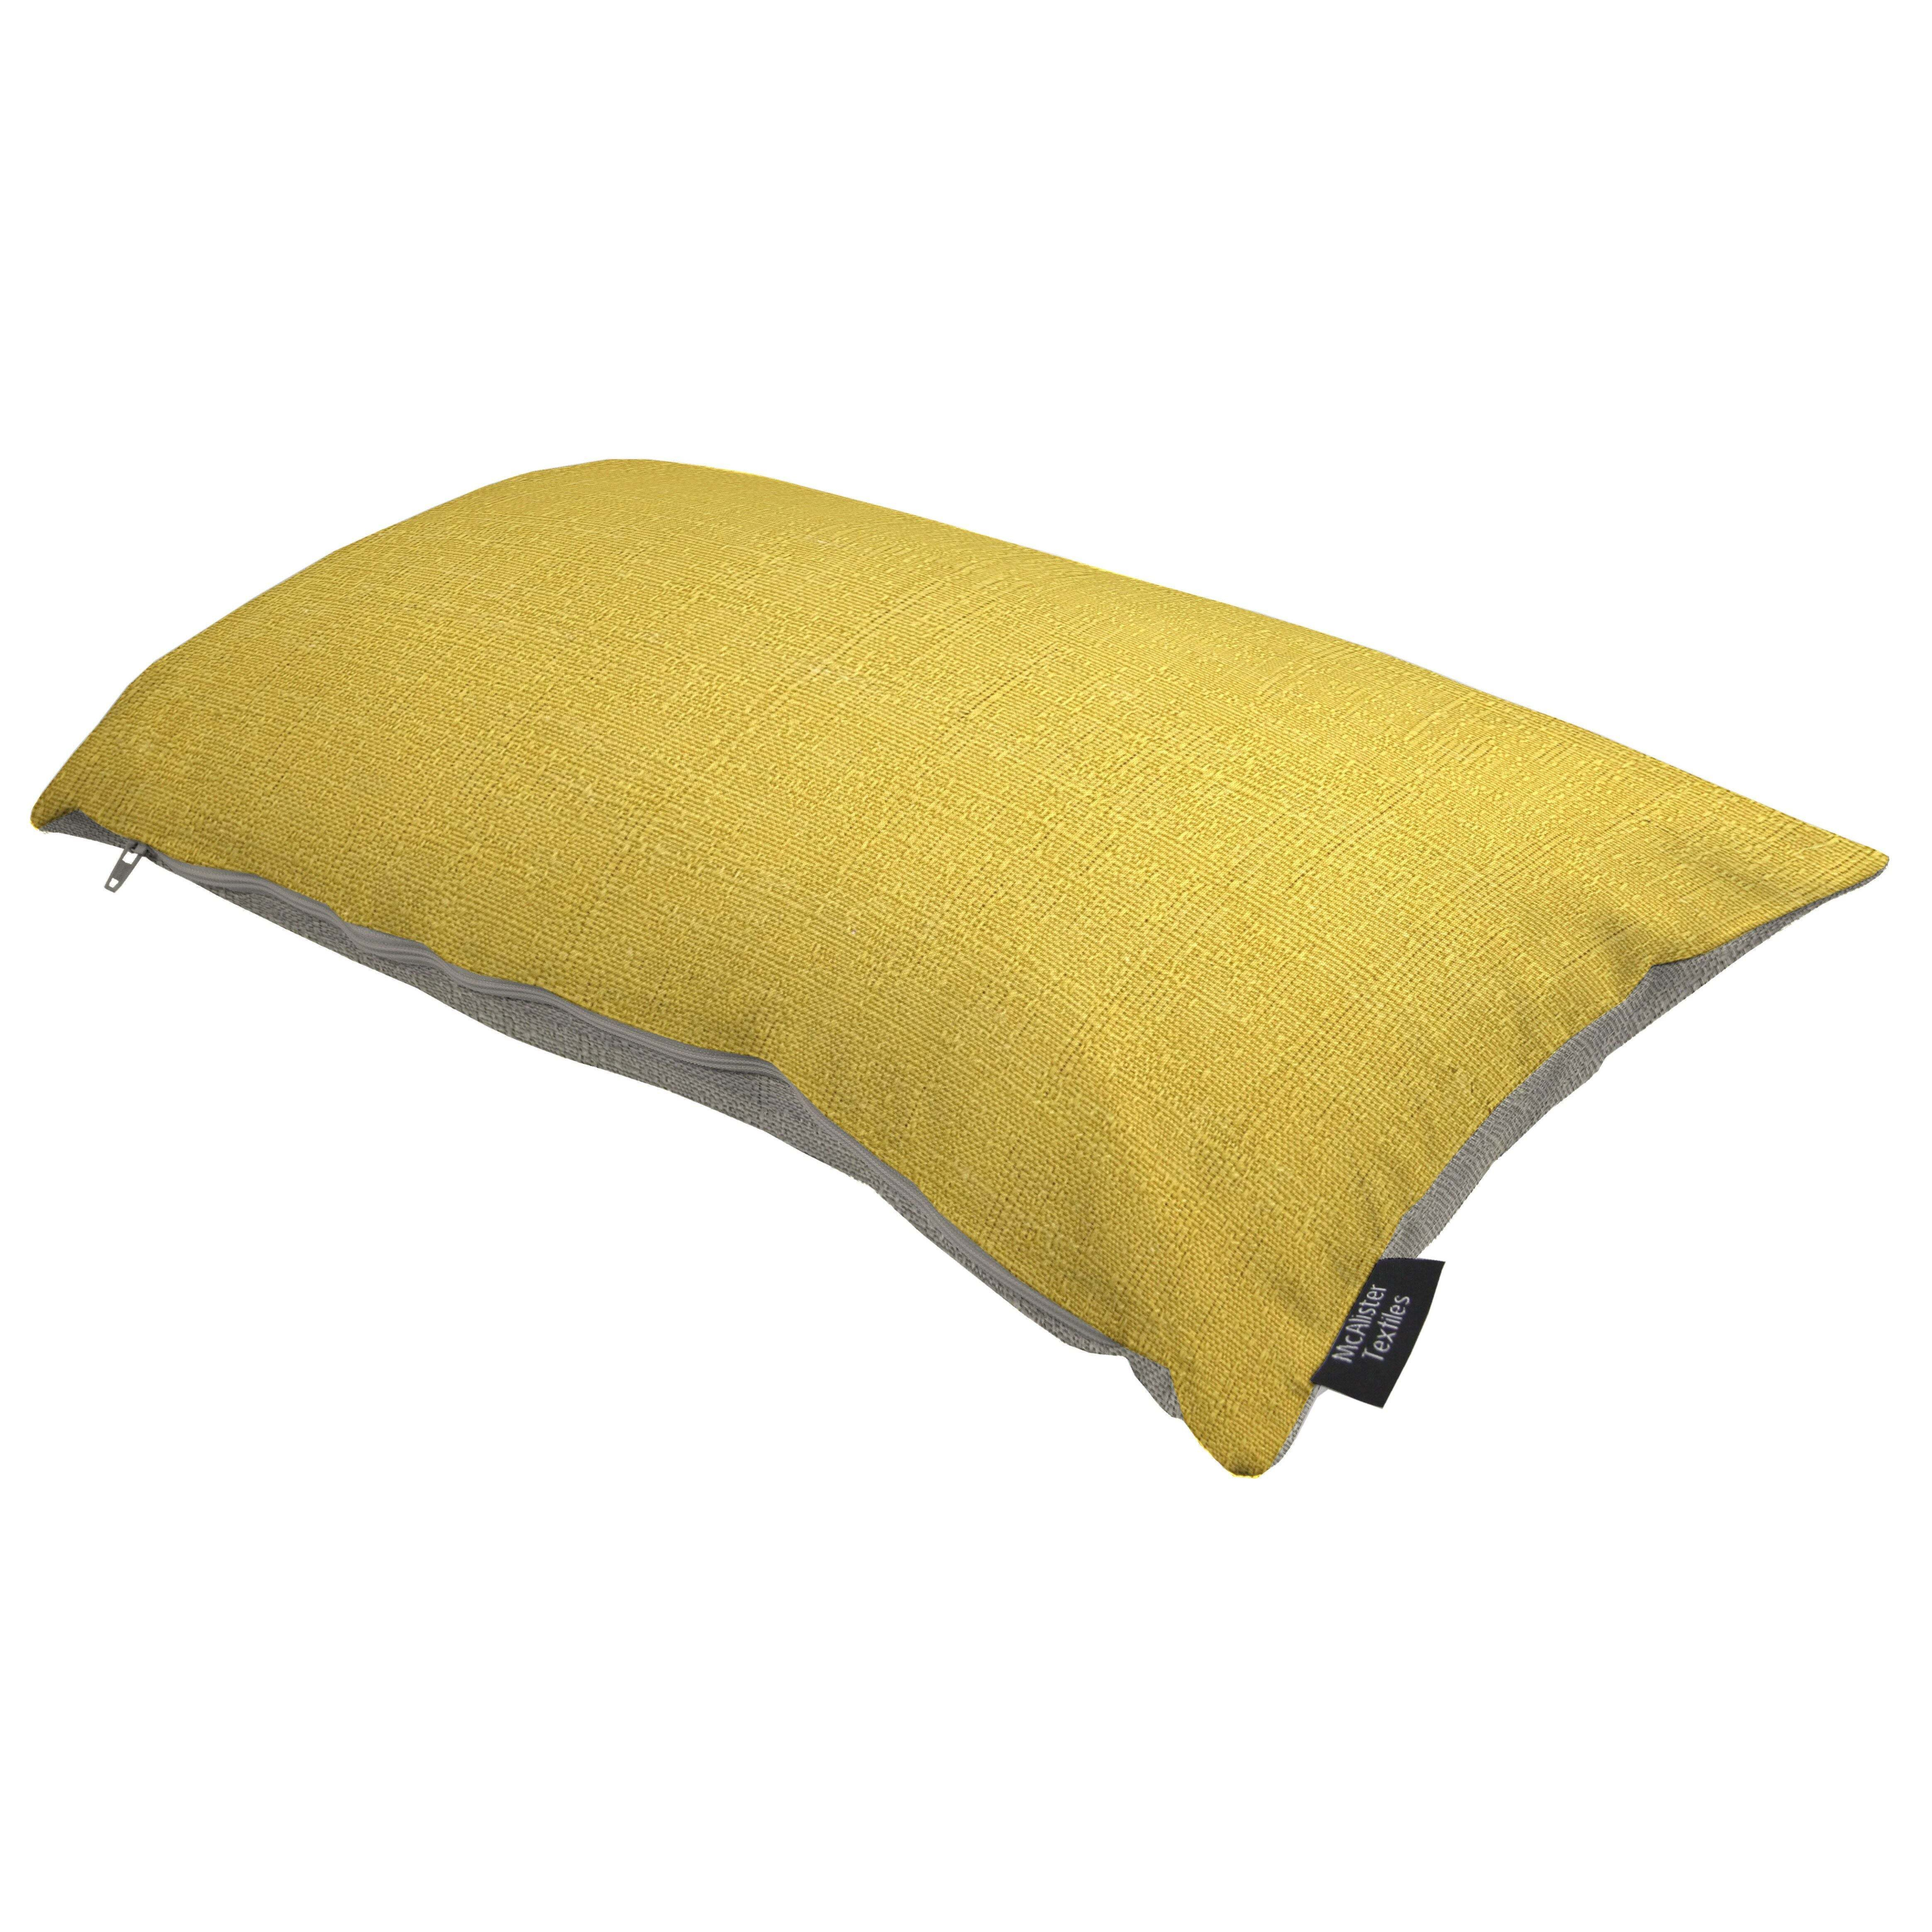 Harmony Ochre Yellow and Dove Grey Plain Pillow, Cover Only / 50cm x 30cm